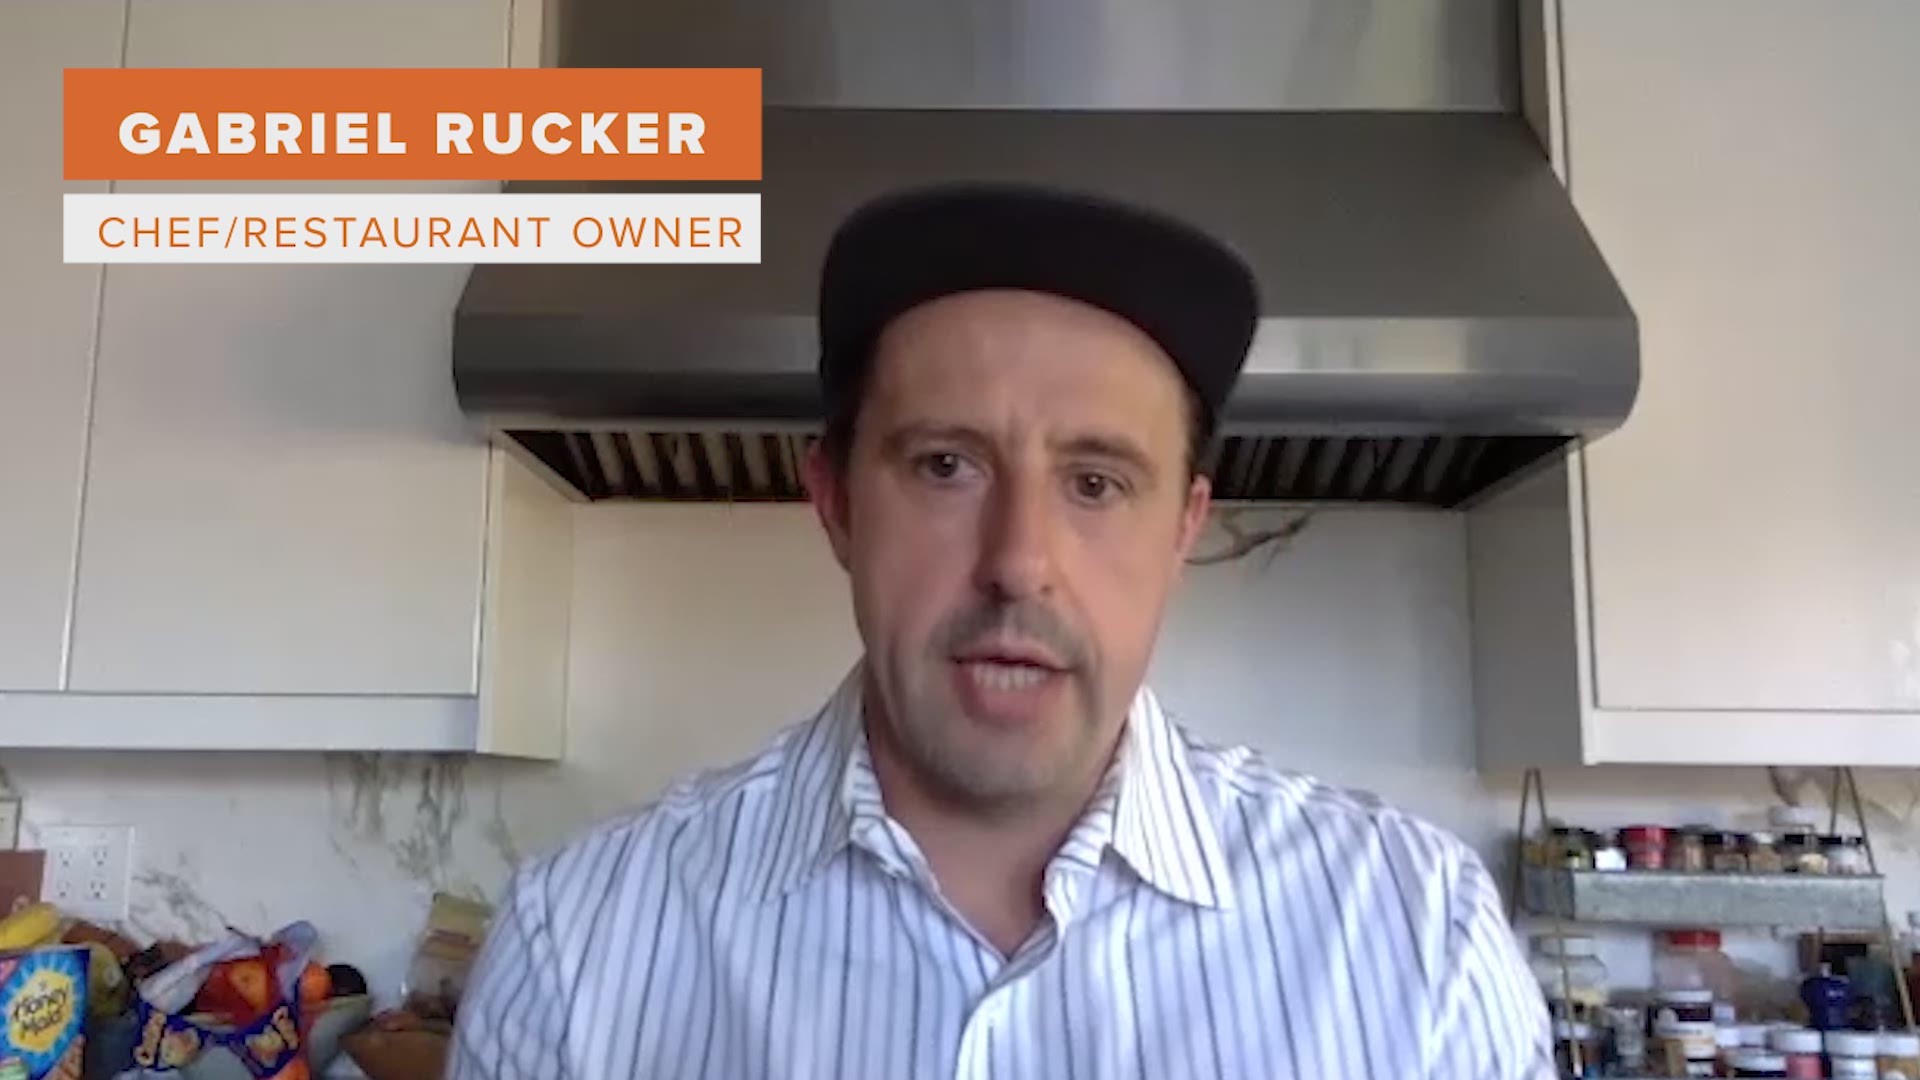 Normally, you have to go to Le Pigeon or Canard to eat Gabriel Rucker's delicious food. Now, you can make it in your own kitchen, when you follow along on Instagram.